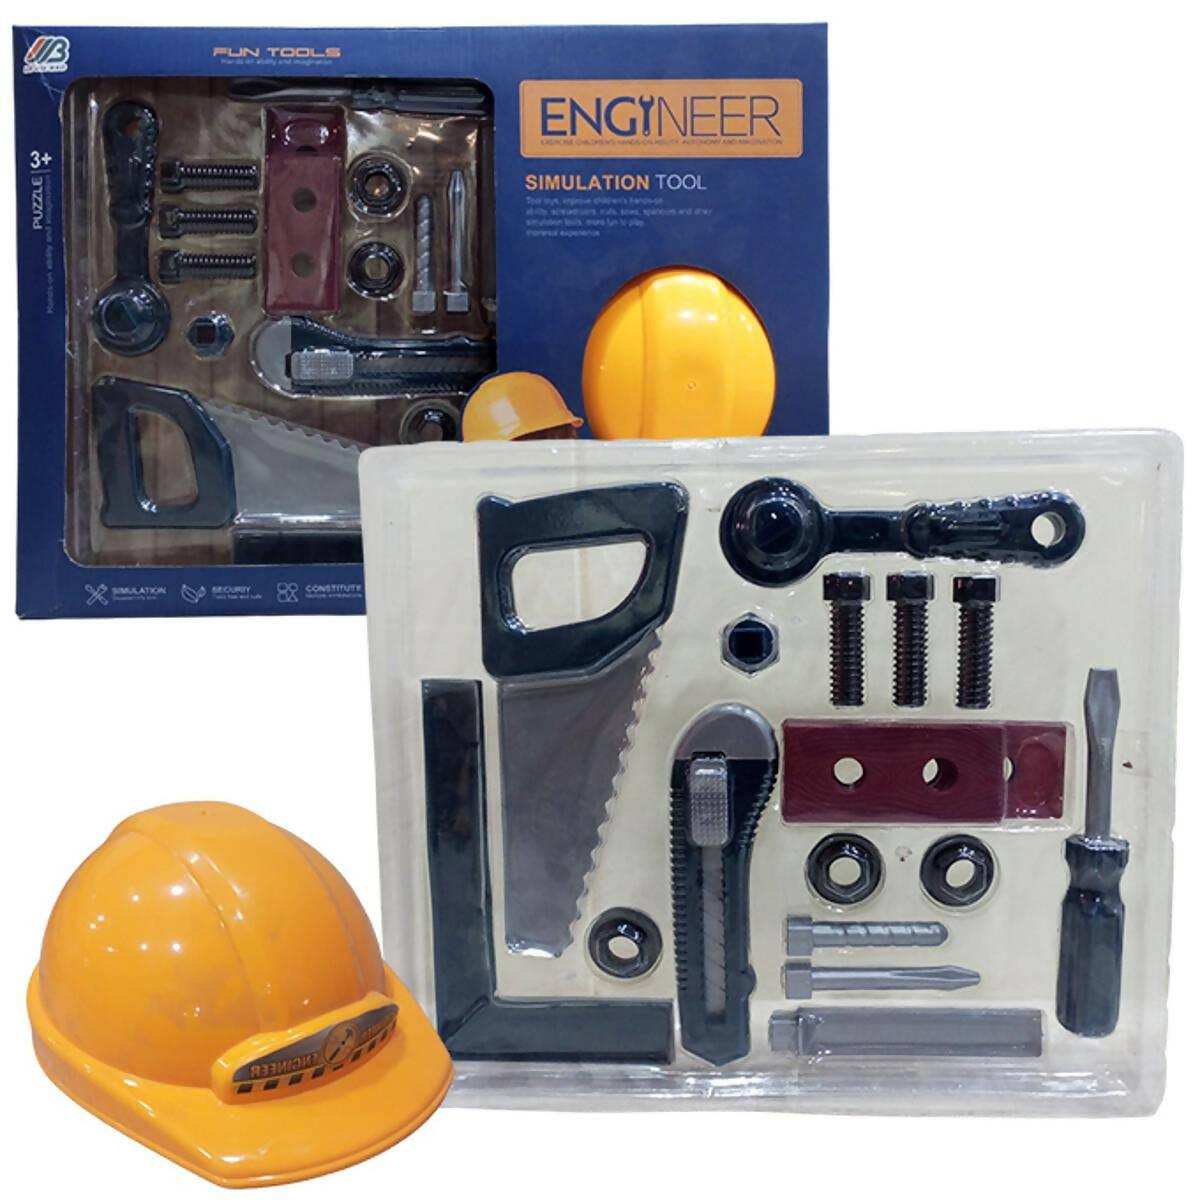 Engineering Workshop Tool kit with Safety Helmet & Construction Equipment's Tools - ValueBox